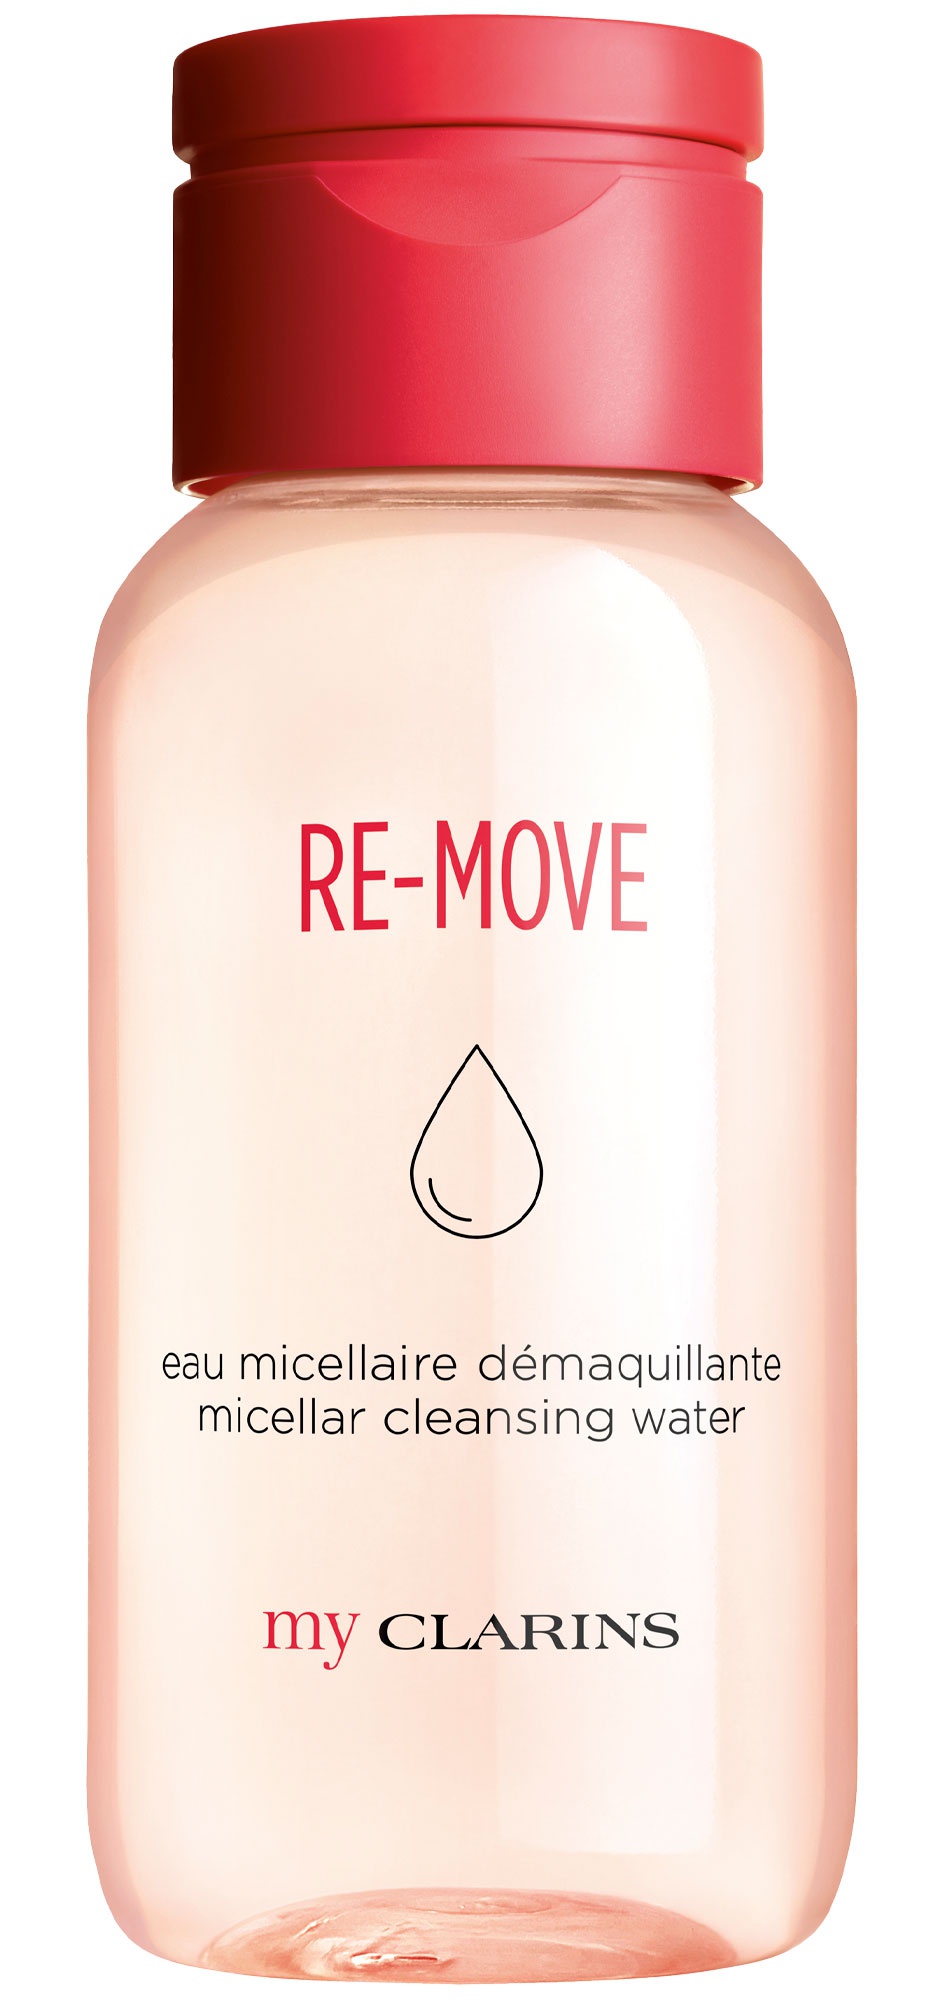 Clarins My Clarins Re-move Micellar Cleansing Water